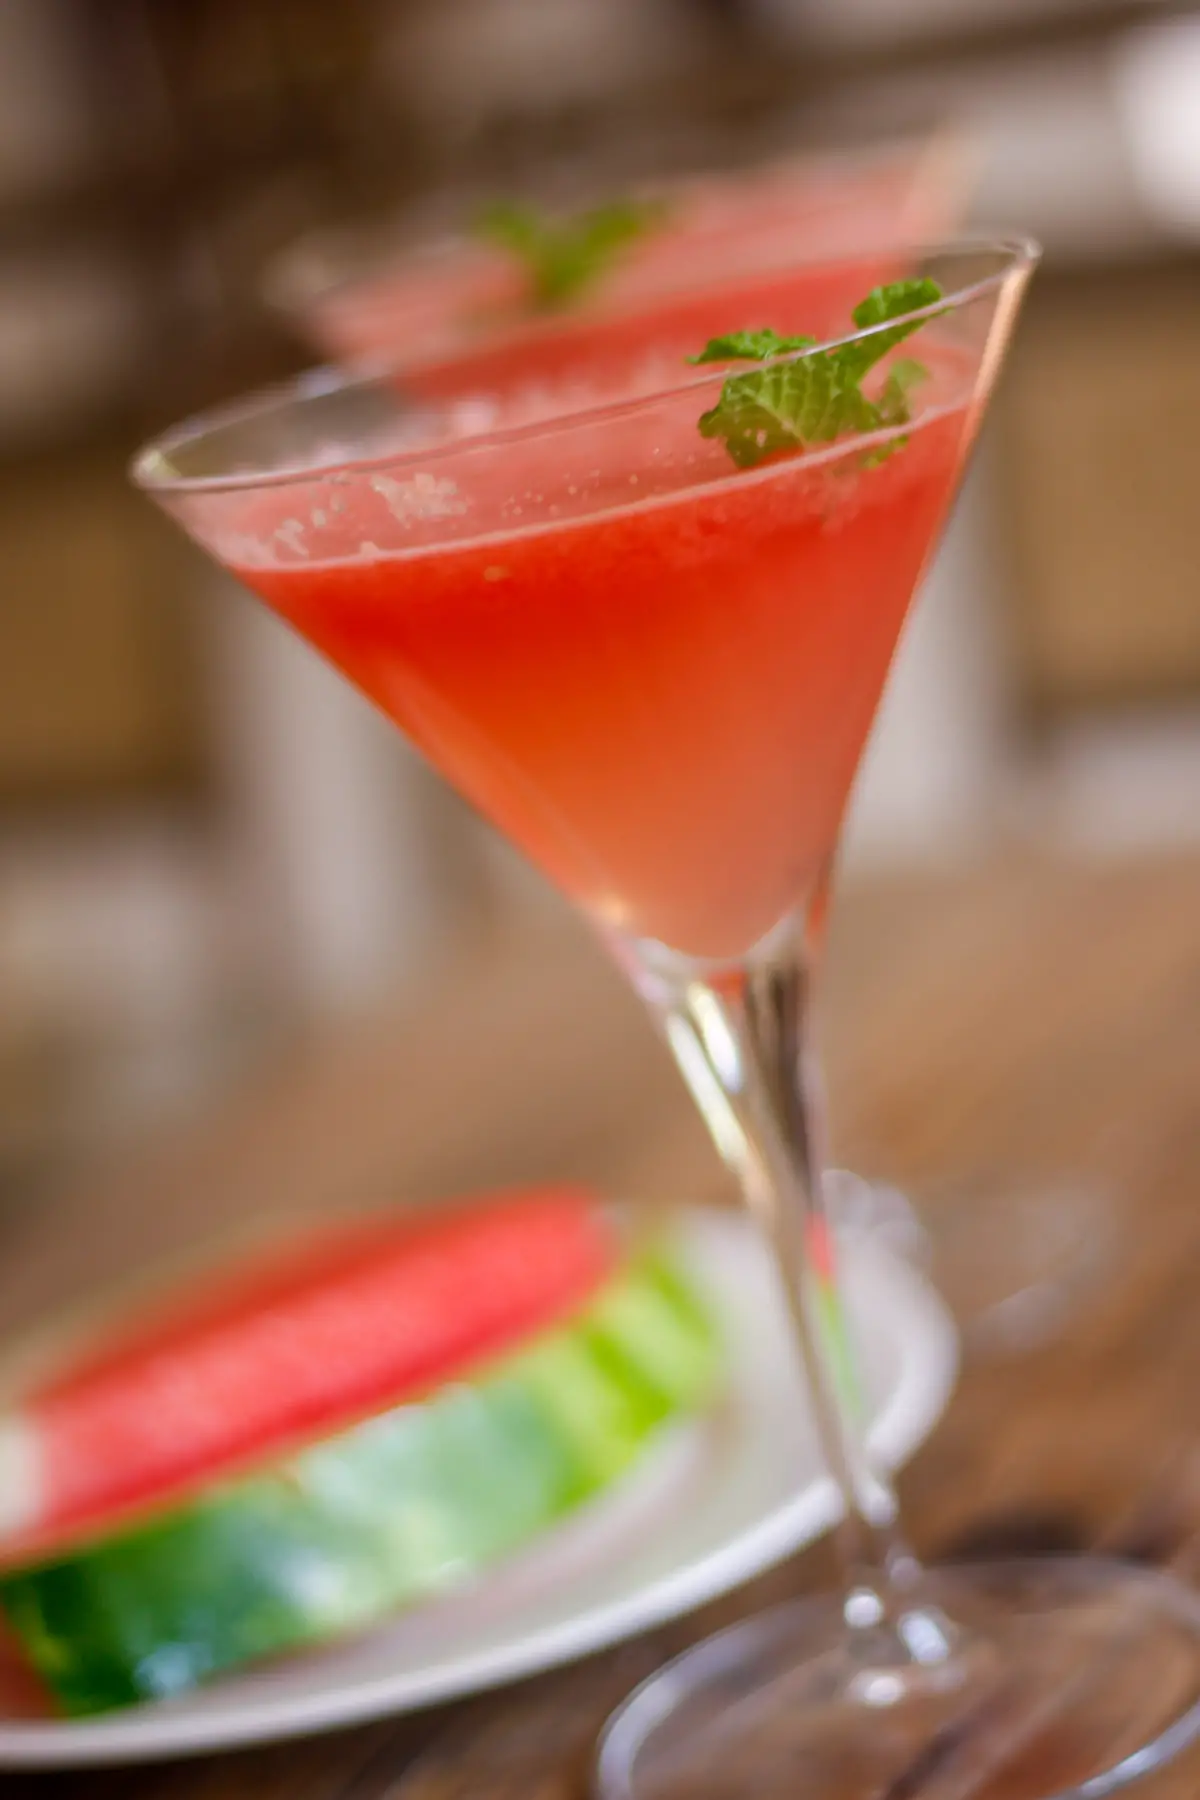 Martini glass filled with watermelon mocktail garnished with mint and one in the background and a white plate with watermelon slices.